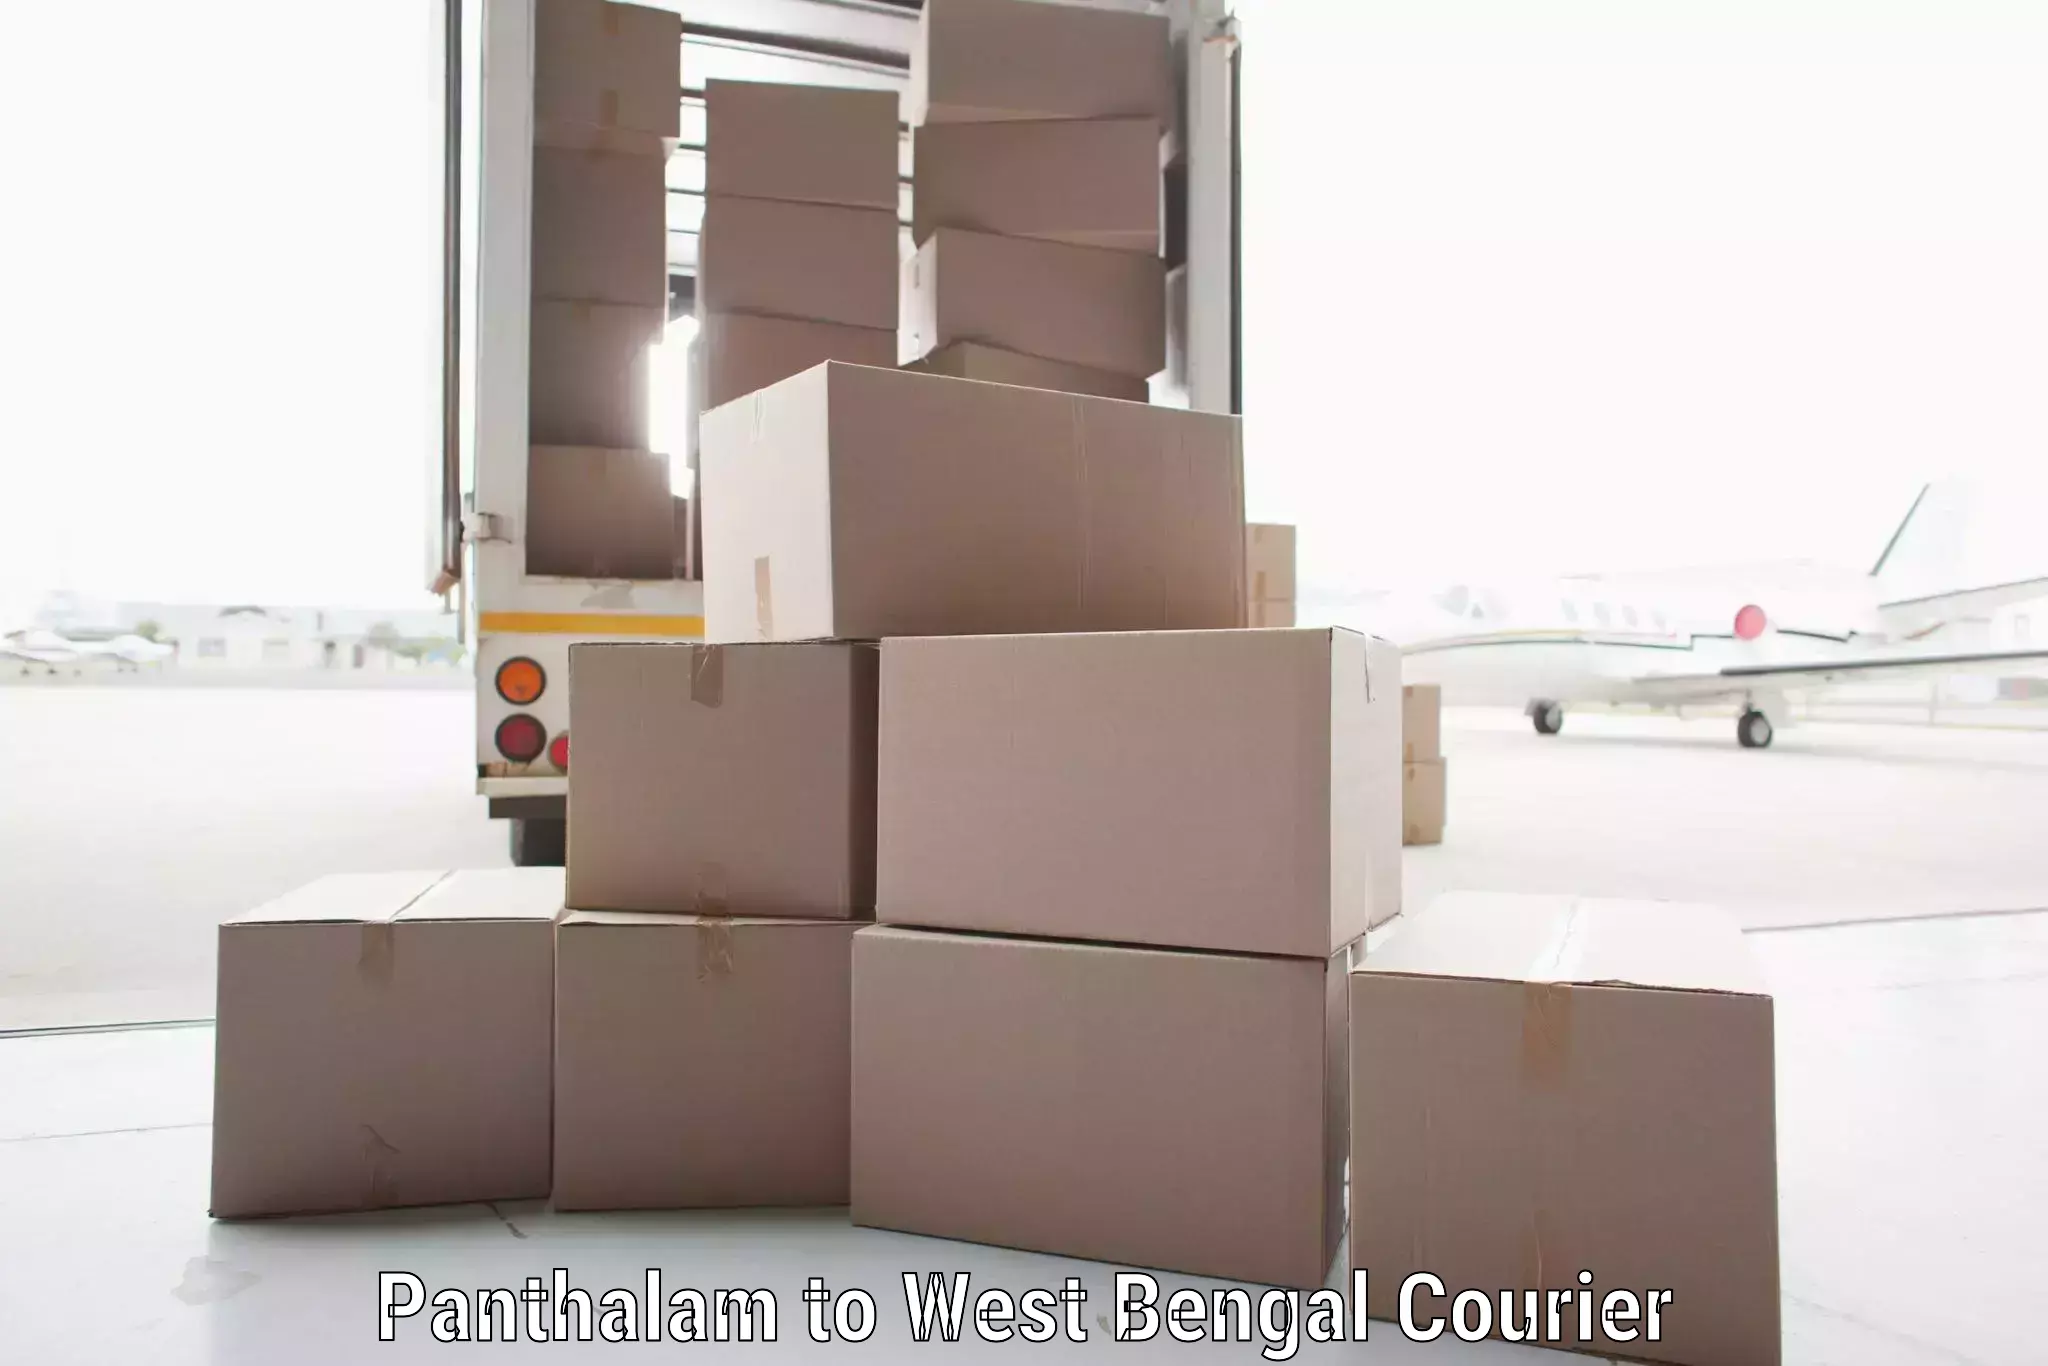 Corporate courier solutions in Panthalam to Joypul